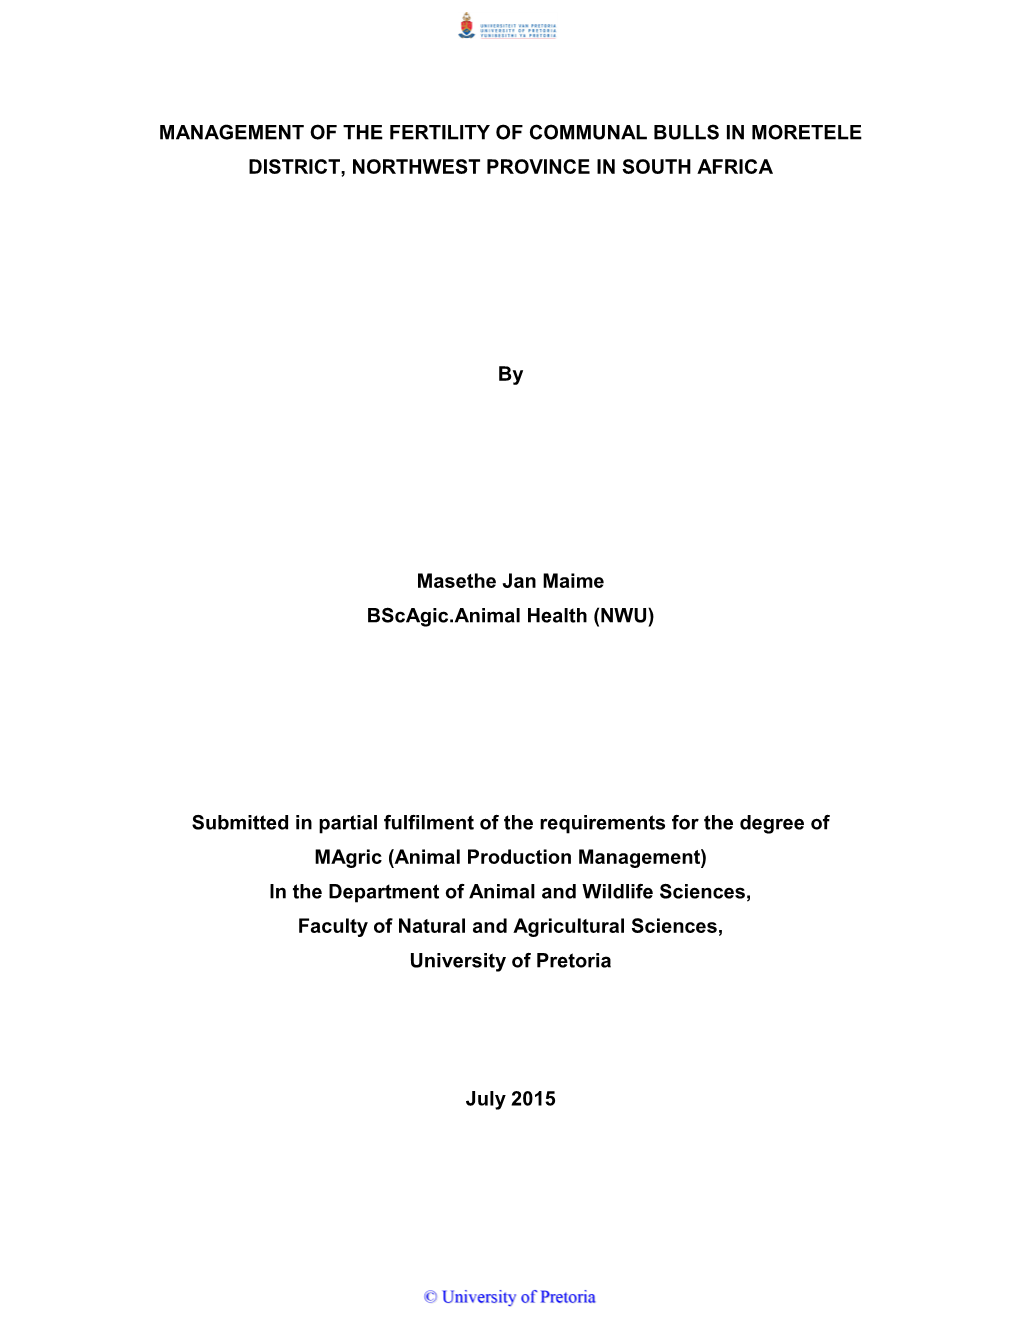 Management of the Fertility of Communal Bulls in Moretele District, Northwest Province in South Africa